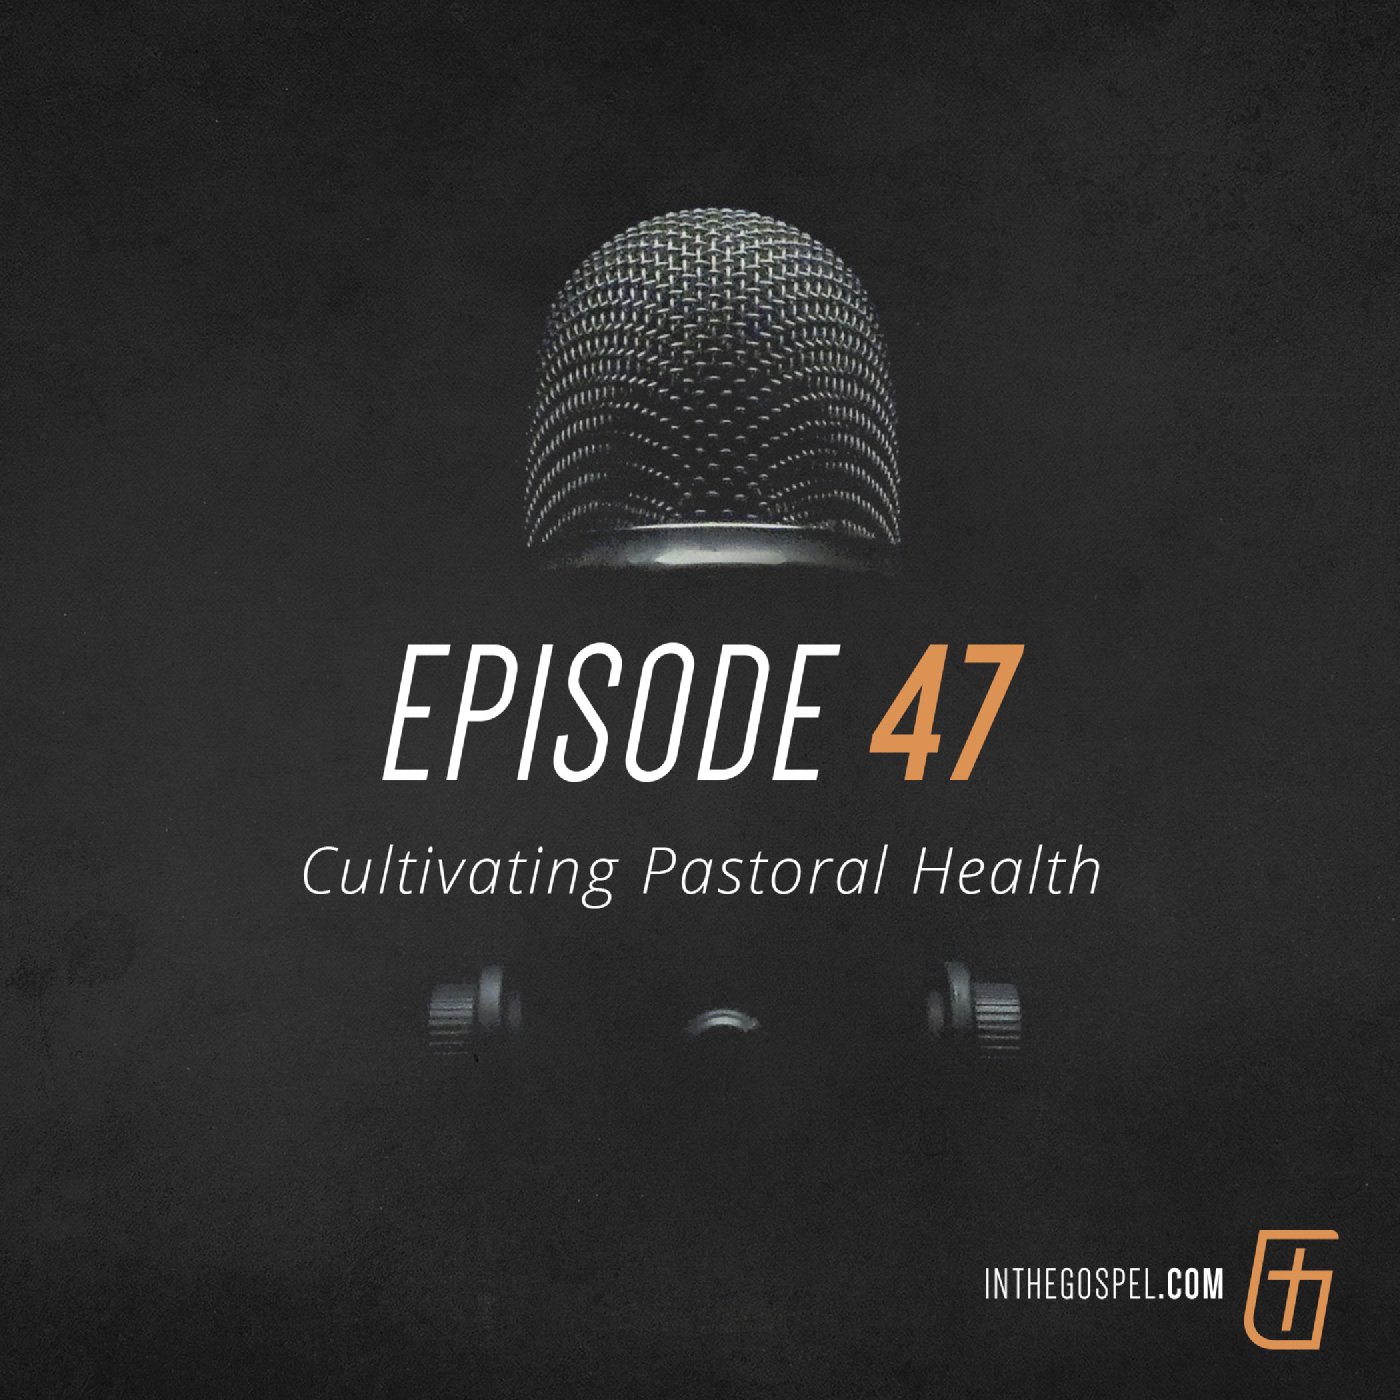 Episode 47: Cultivating Pastoral Health (with Jonathan Hoover)